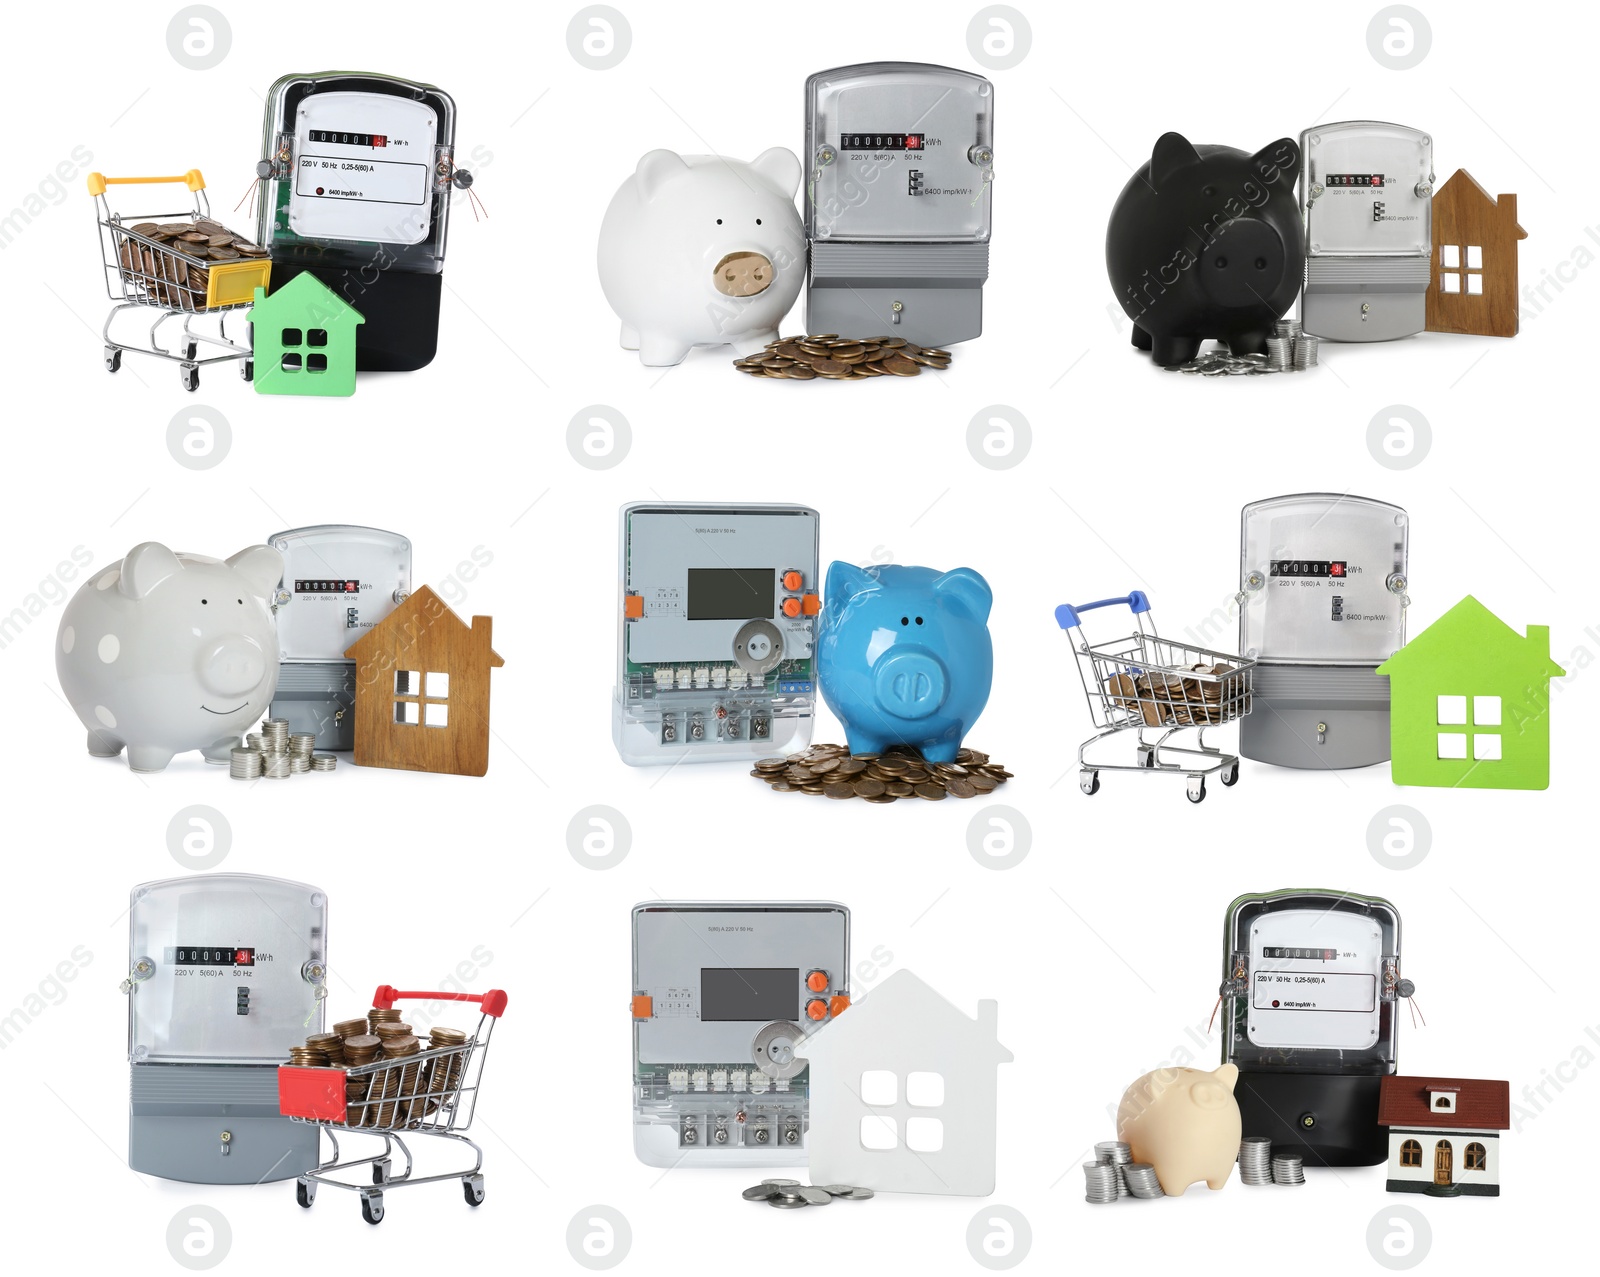 Image of Set of different electricity meters, house models, piggy banks and stacked coins on white background